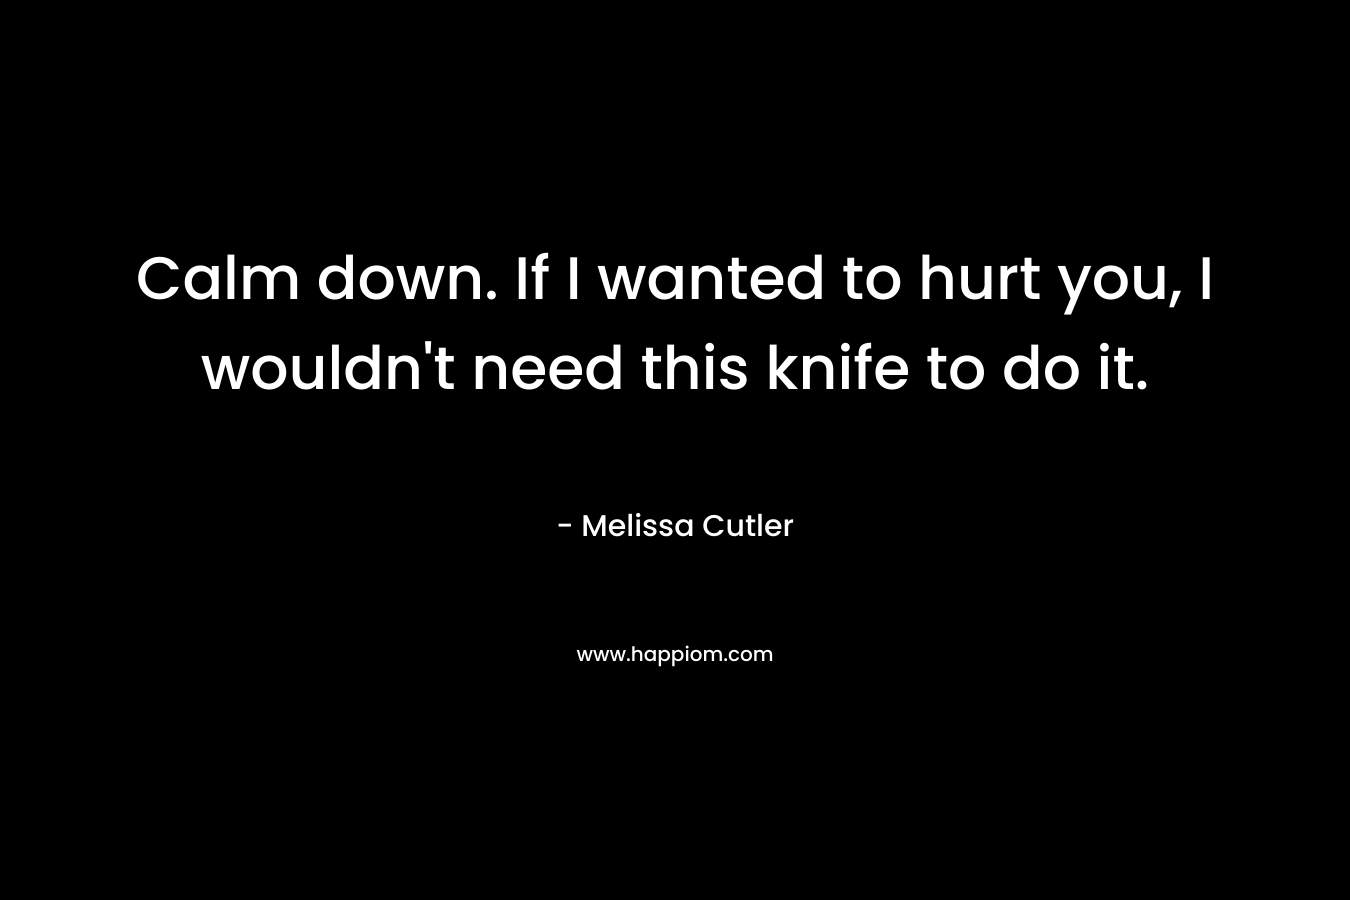 Calm down. If I wanted to hurt you, I wouldn’t need this knife to do it. – Melissa Cutler